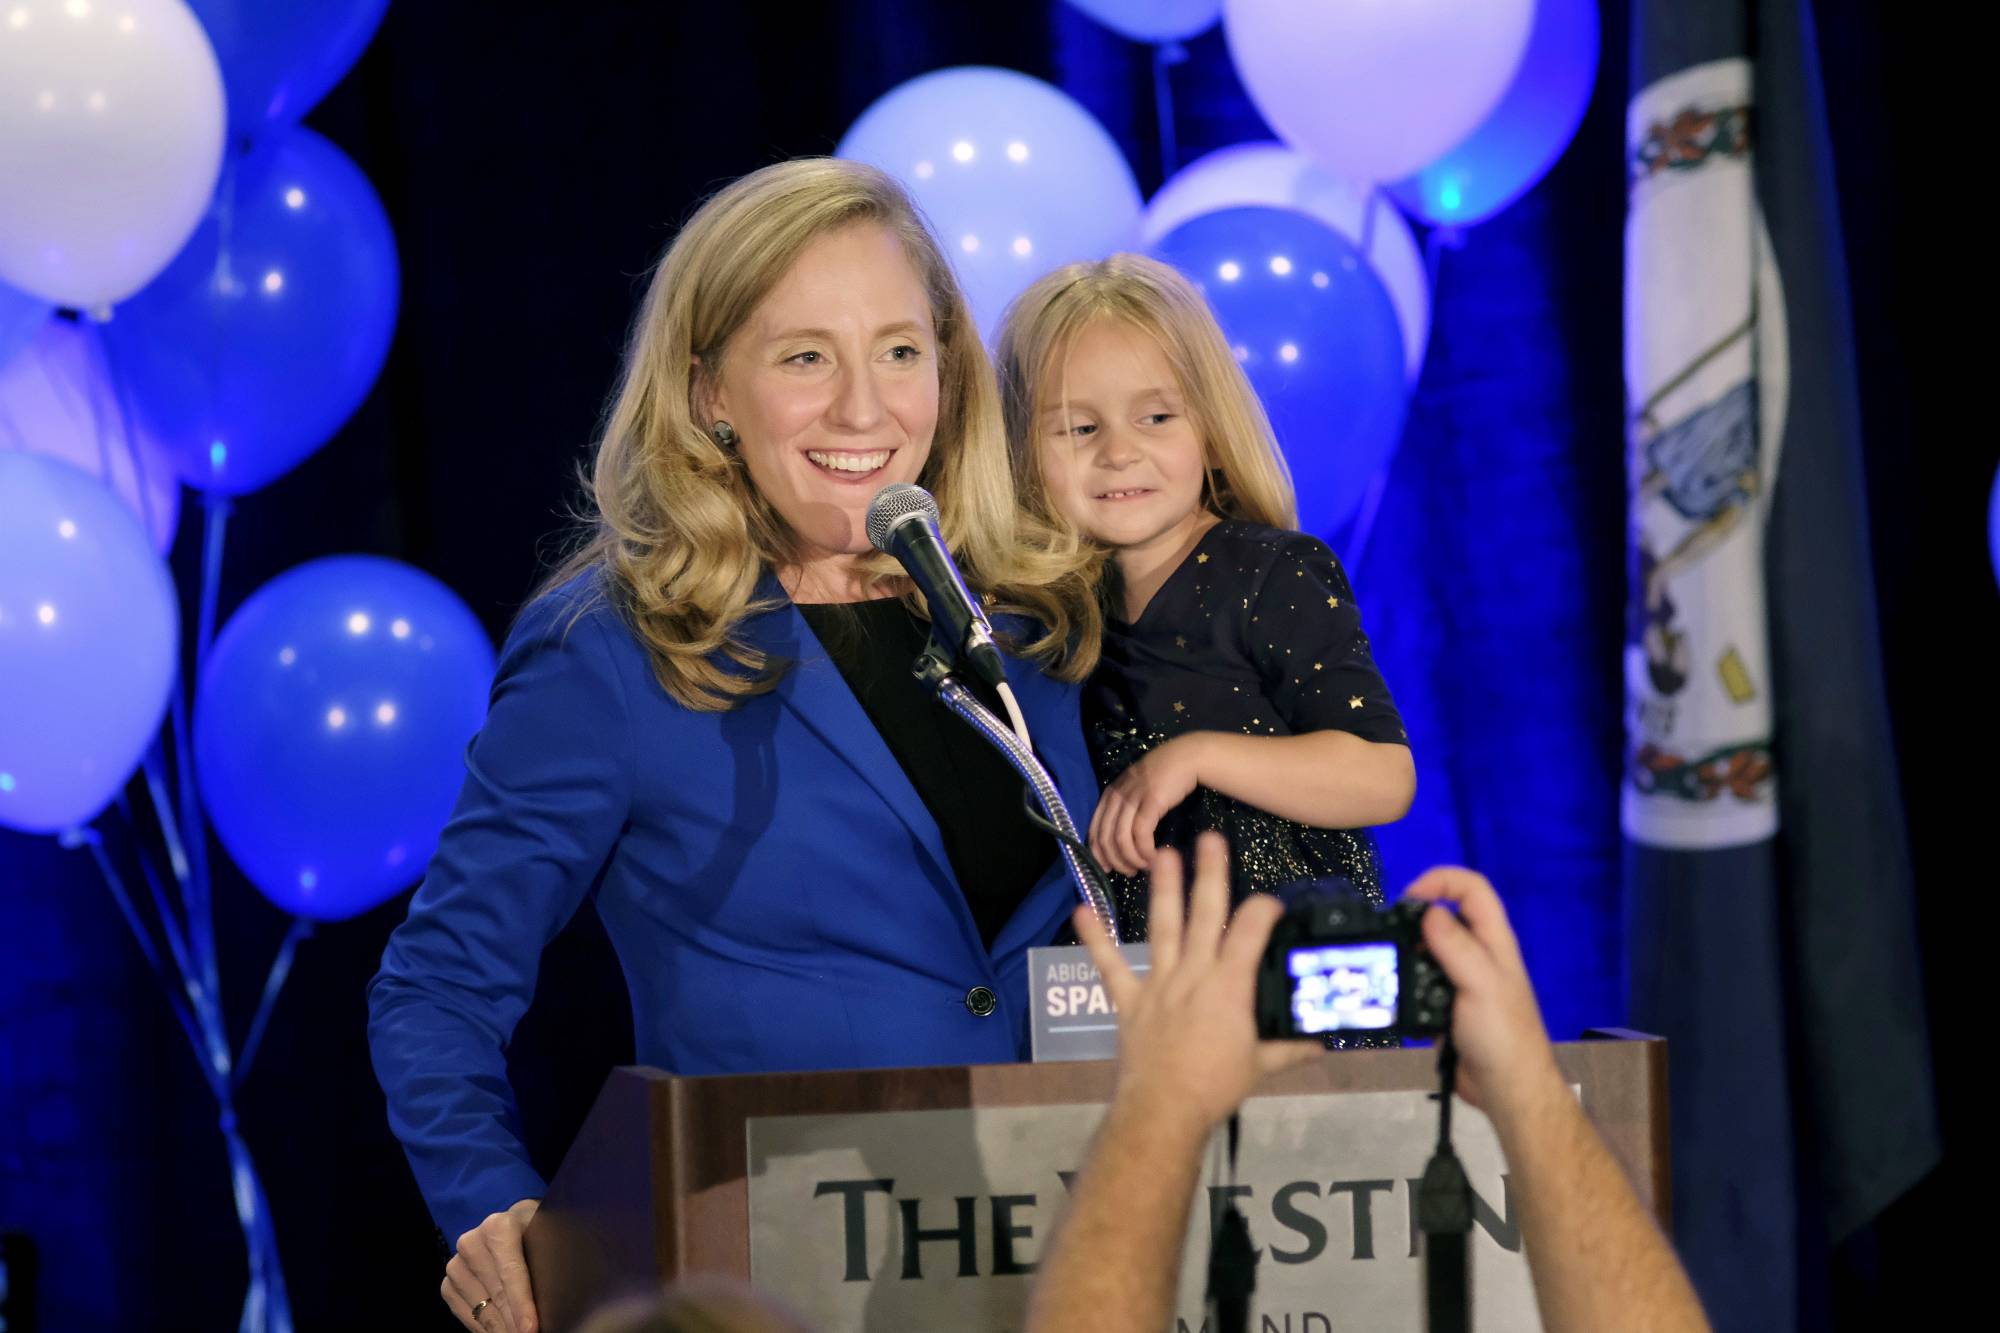 Democrat Abigail Spanberger claims victory in the 7th district Virginia congressional race while holding her daughter Catherine, 4, during a victory party in Richmond, Va., late Tuesday, Nov. 6, 2018. She defeated two-term Republican congressman Dave Brat. (Dean Hoffmeyer/Richmond Times-Dispatch via AP)